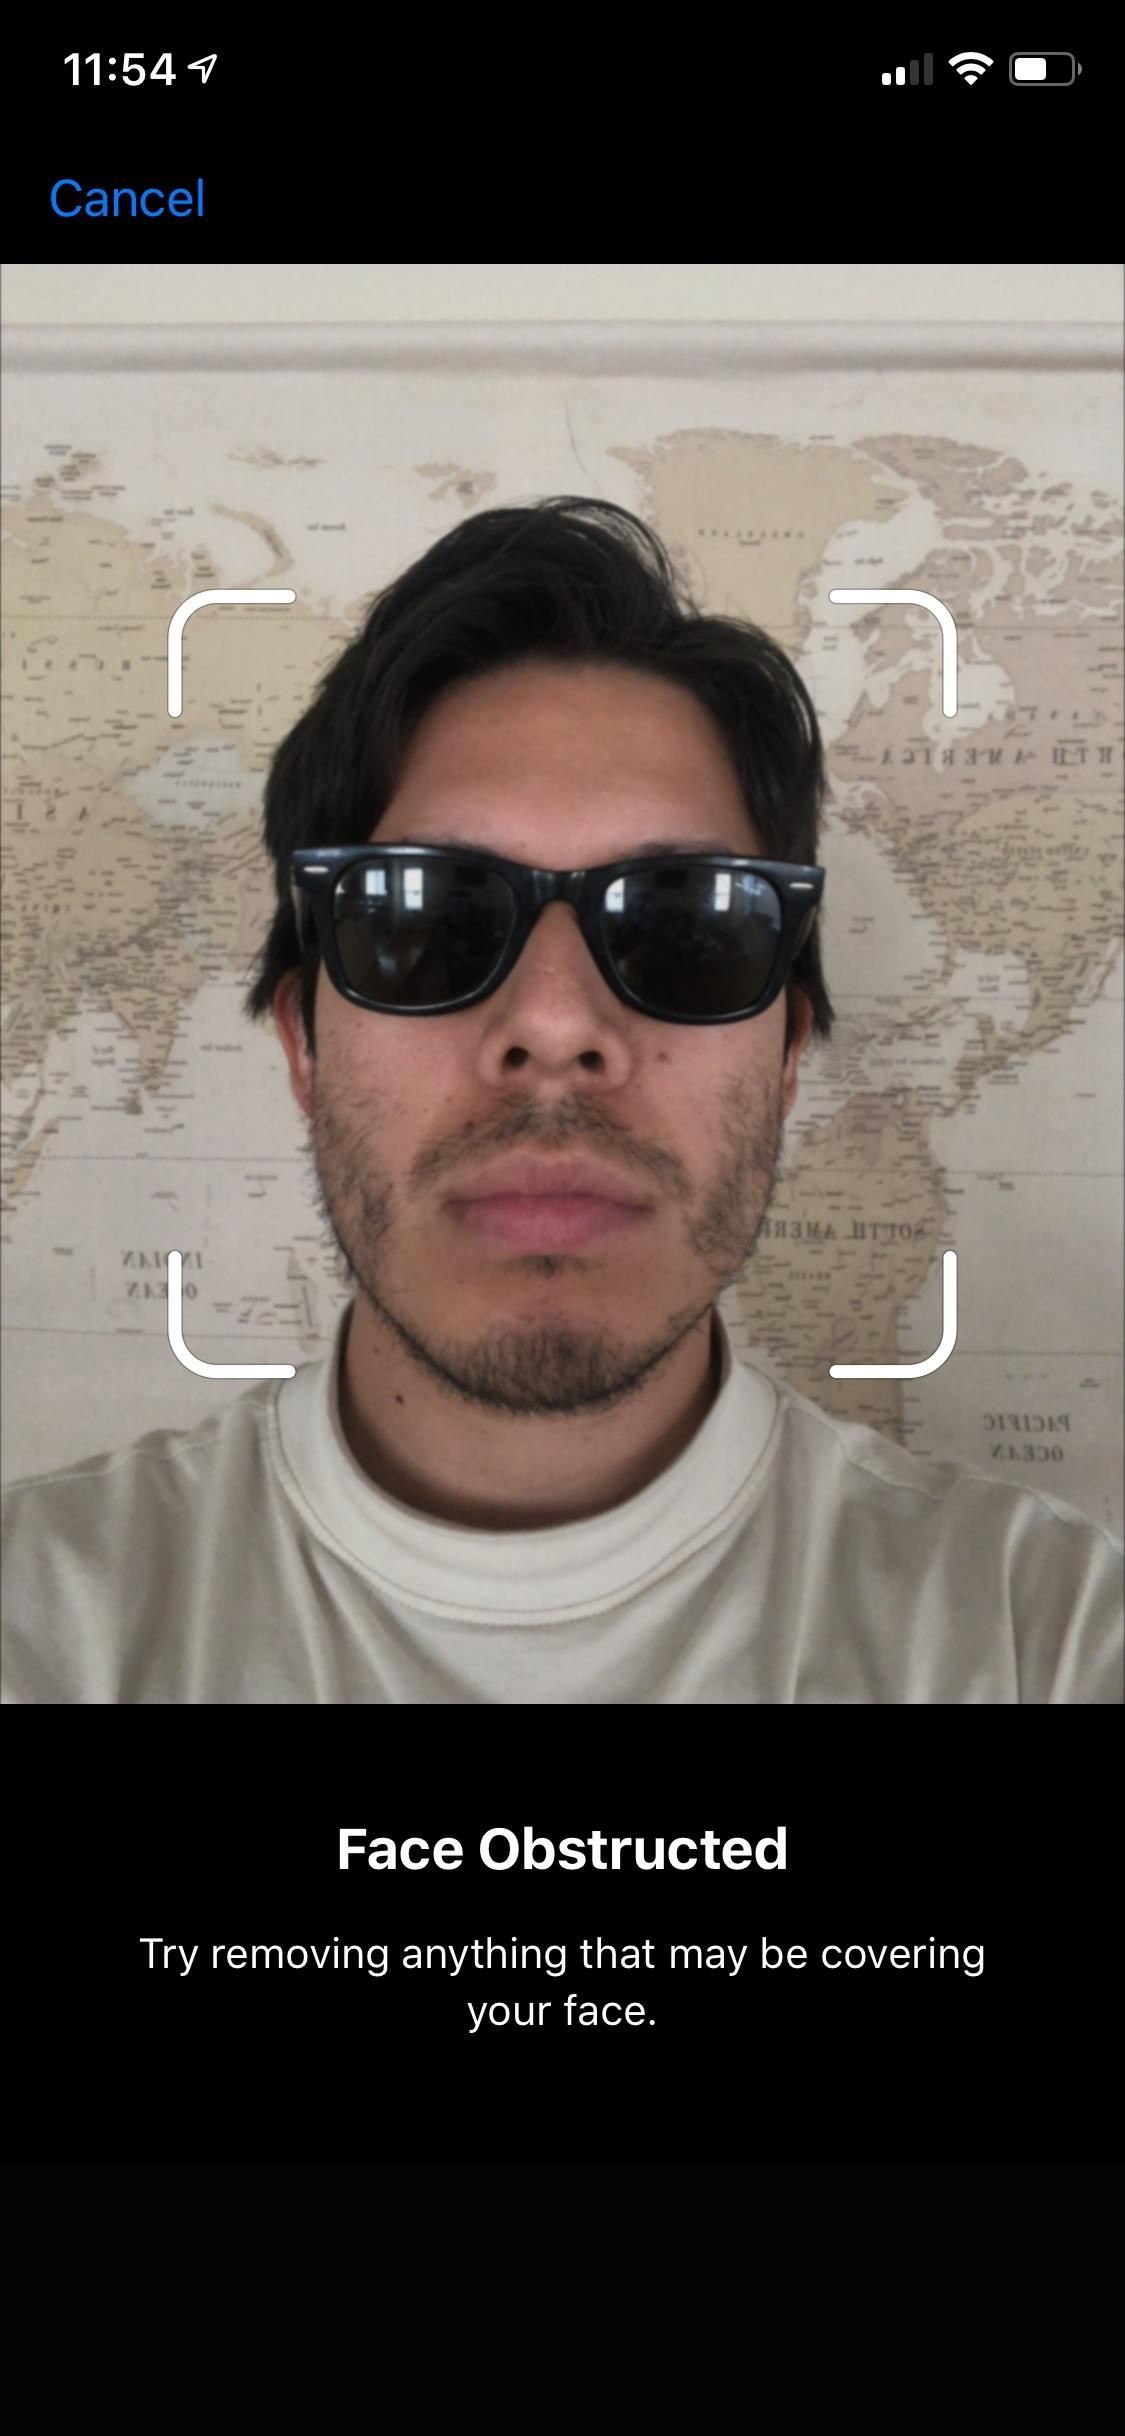 How to Use Face ID with Sunglasses On